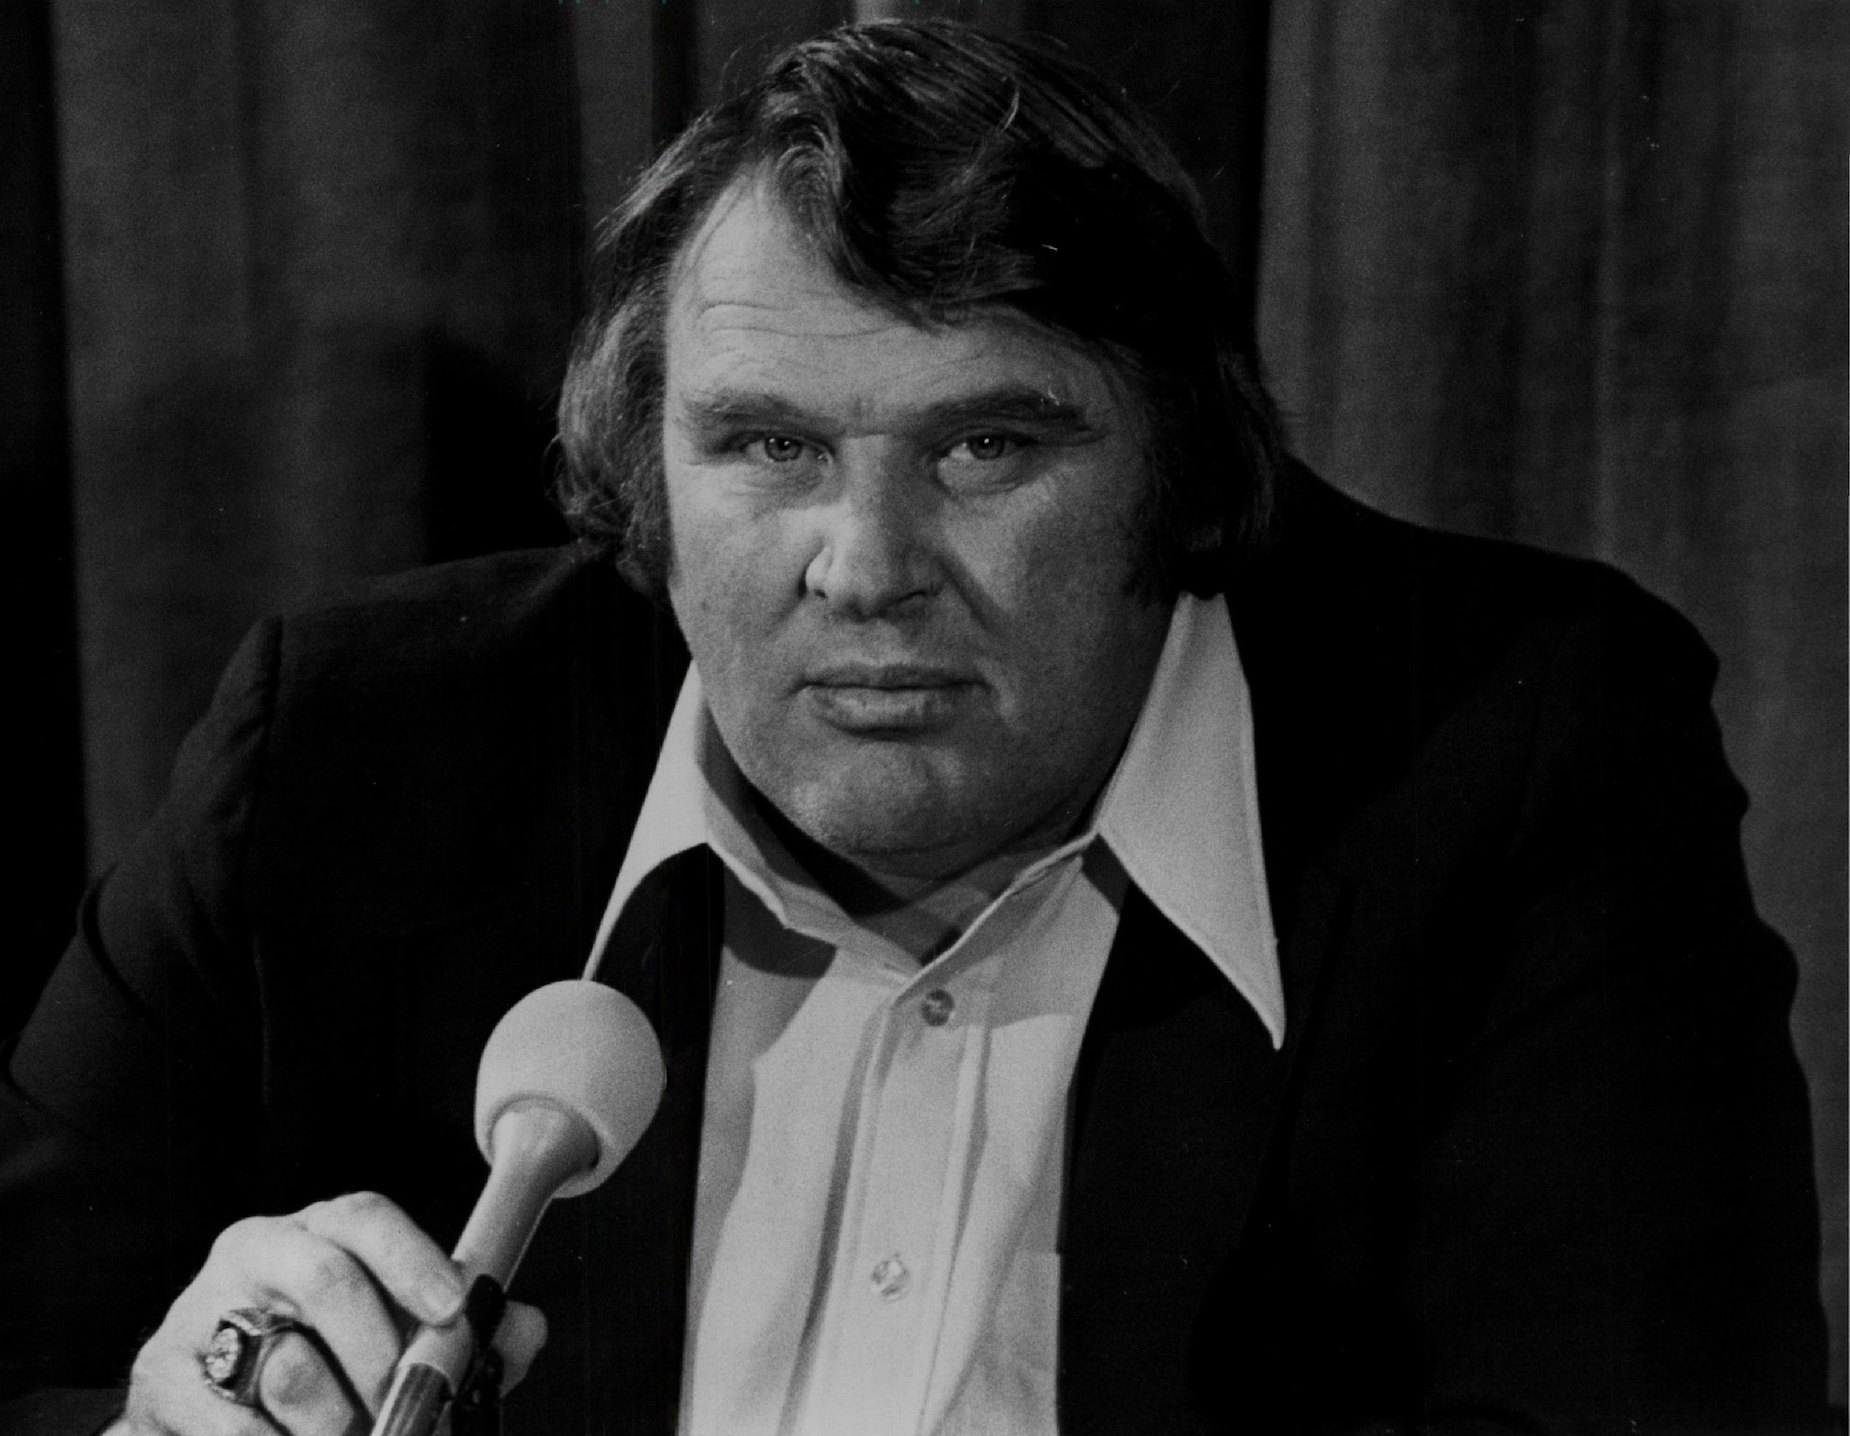 Oakland Raiders head coach John Madden during an interview in the 1970s